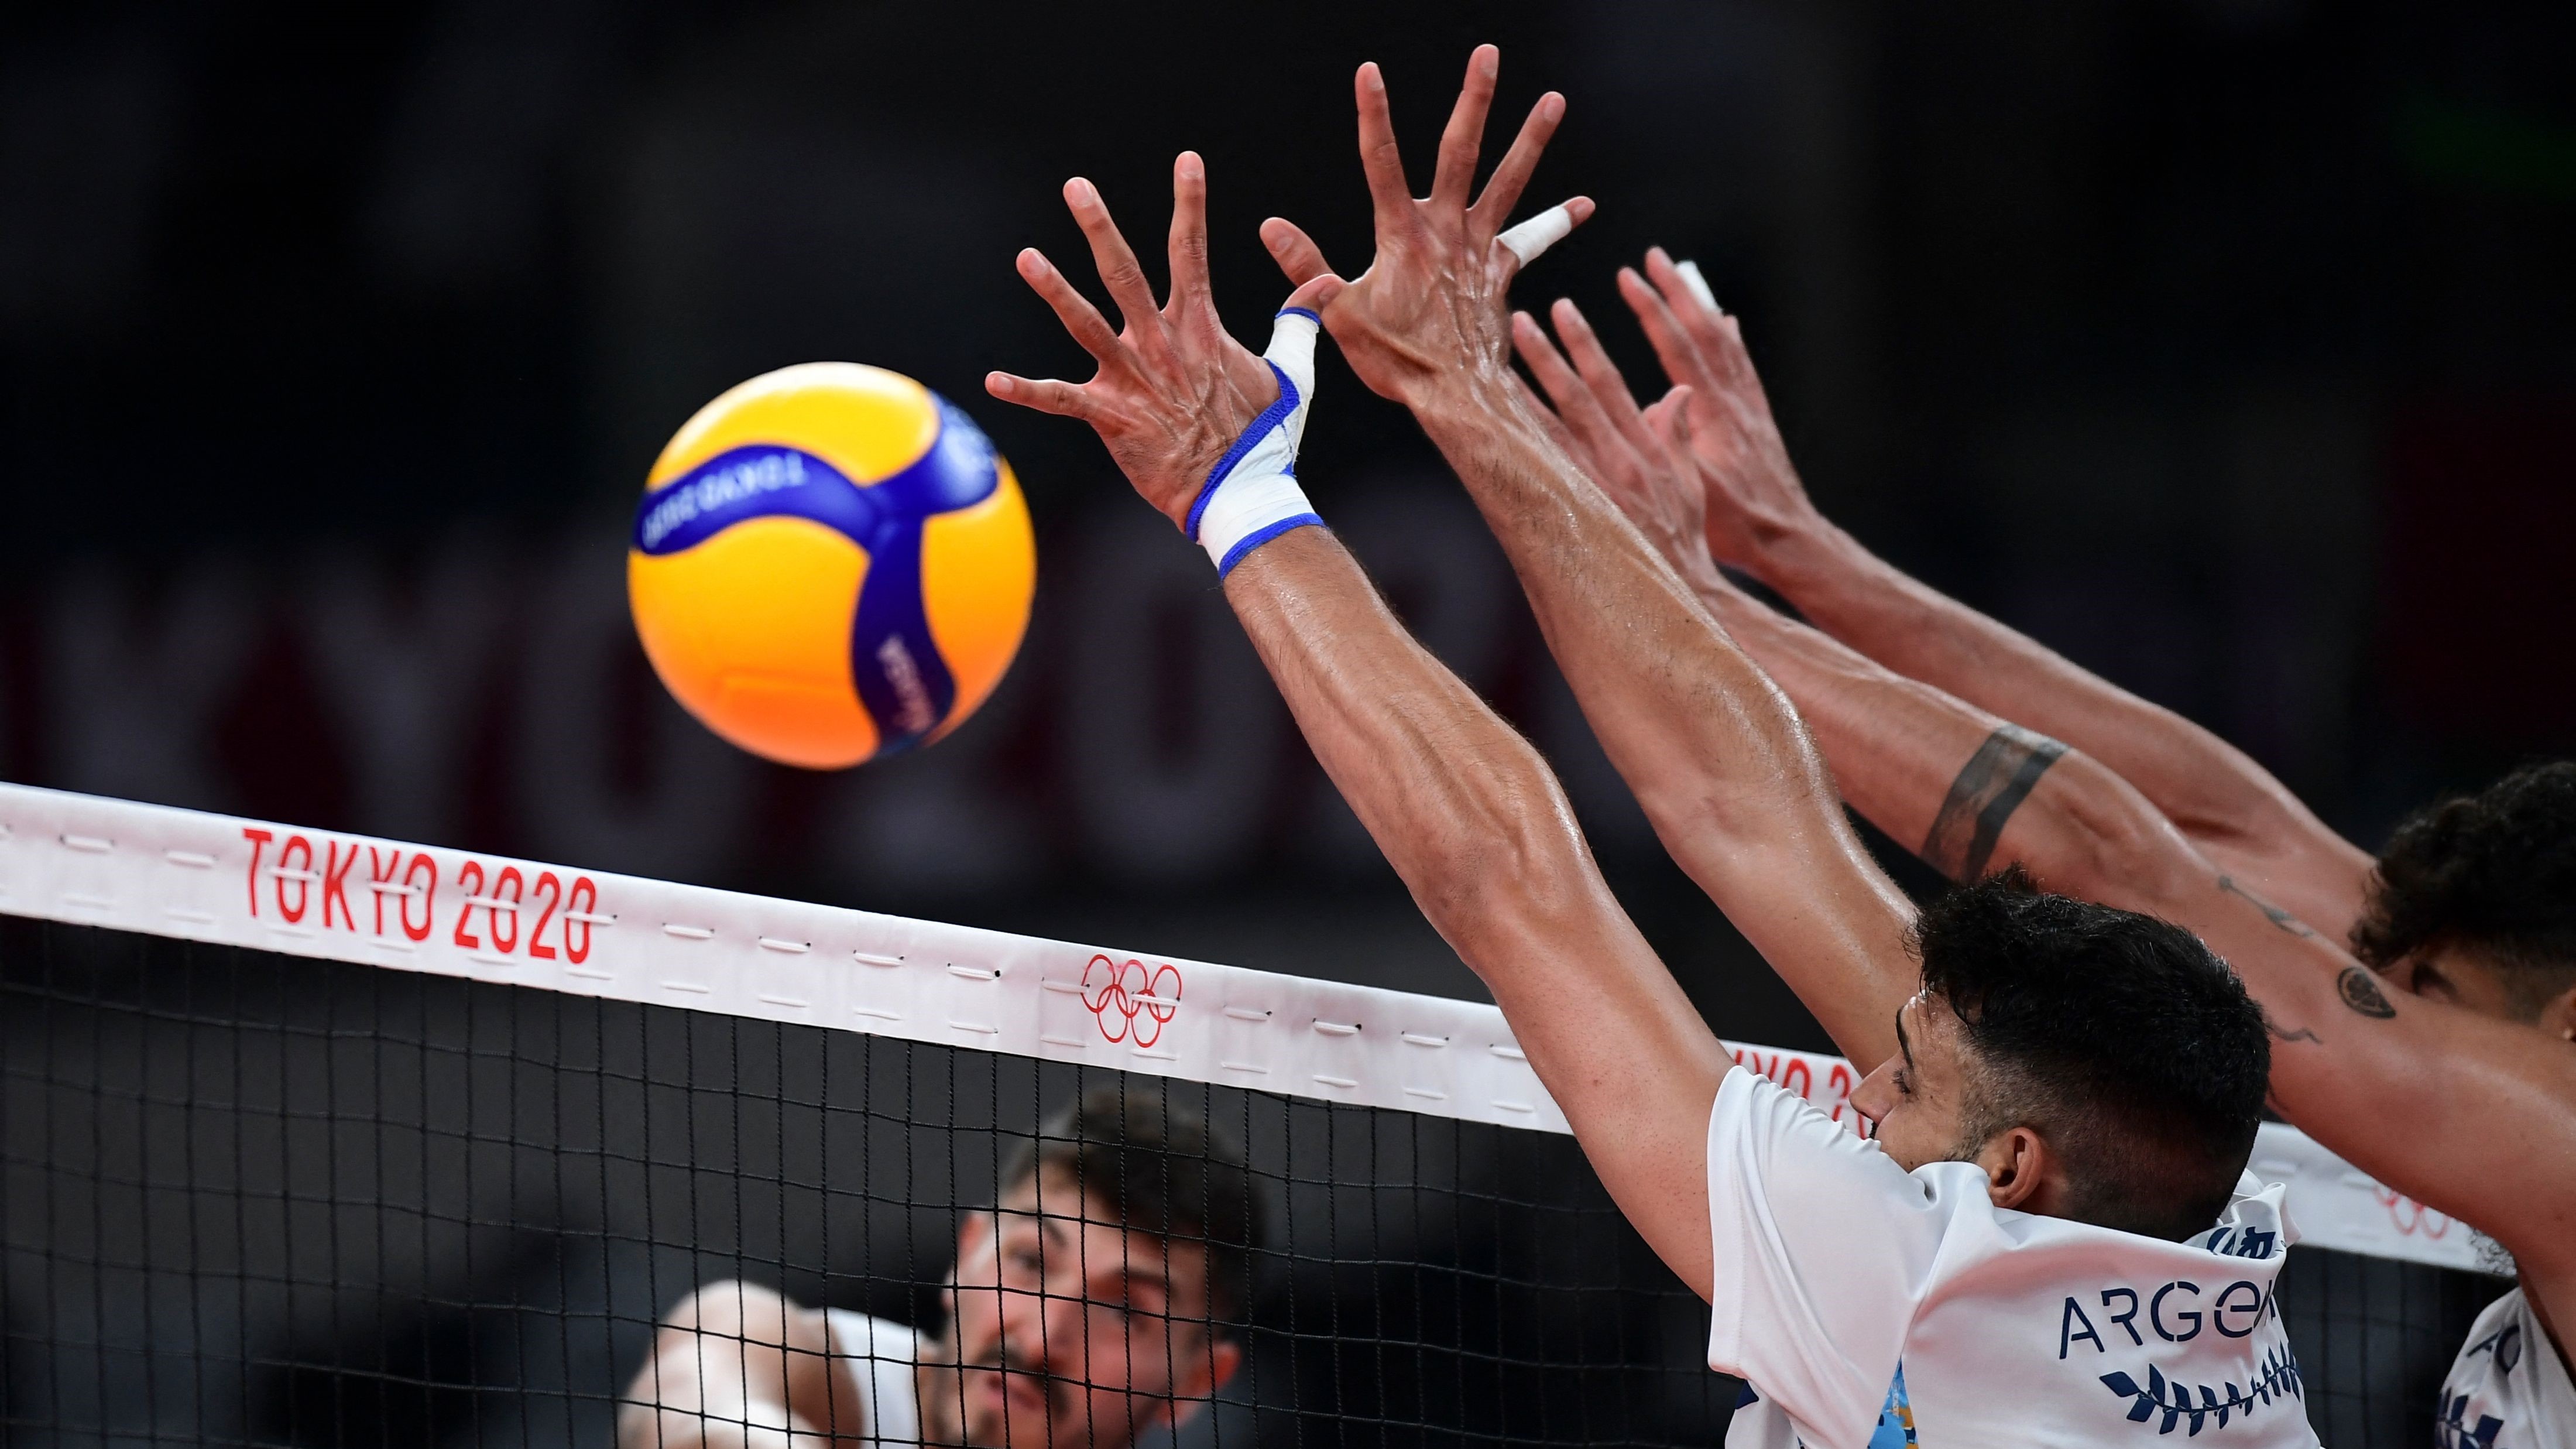 The Argentinian men's volleyball team prepare for the 2020 Olympics